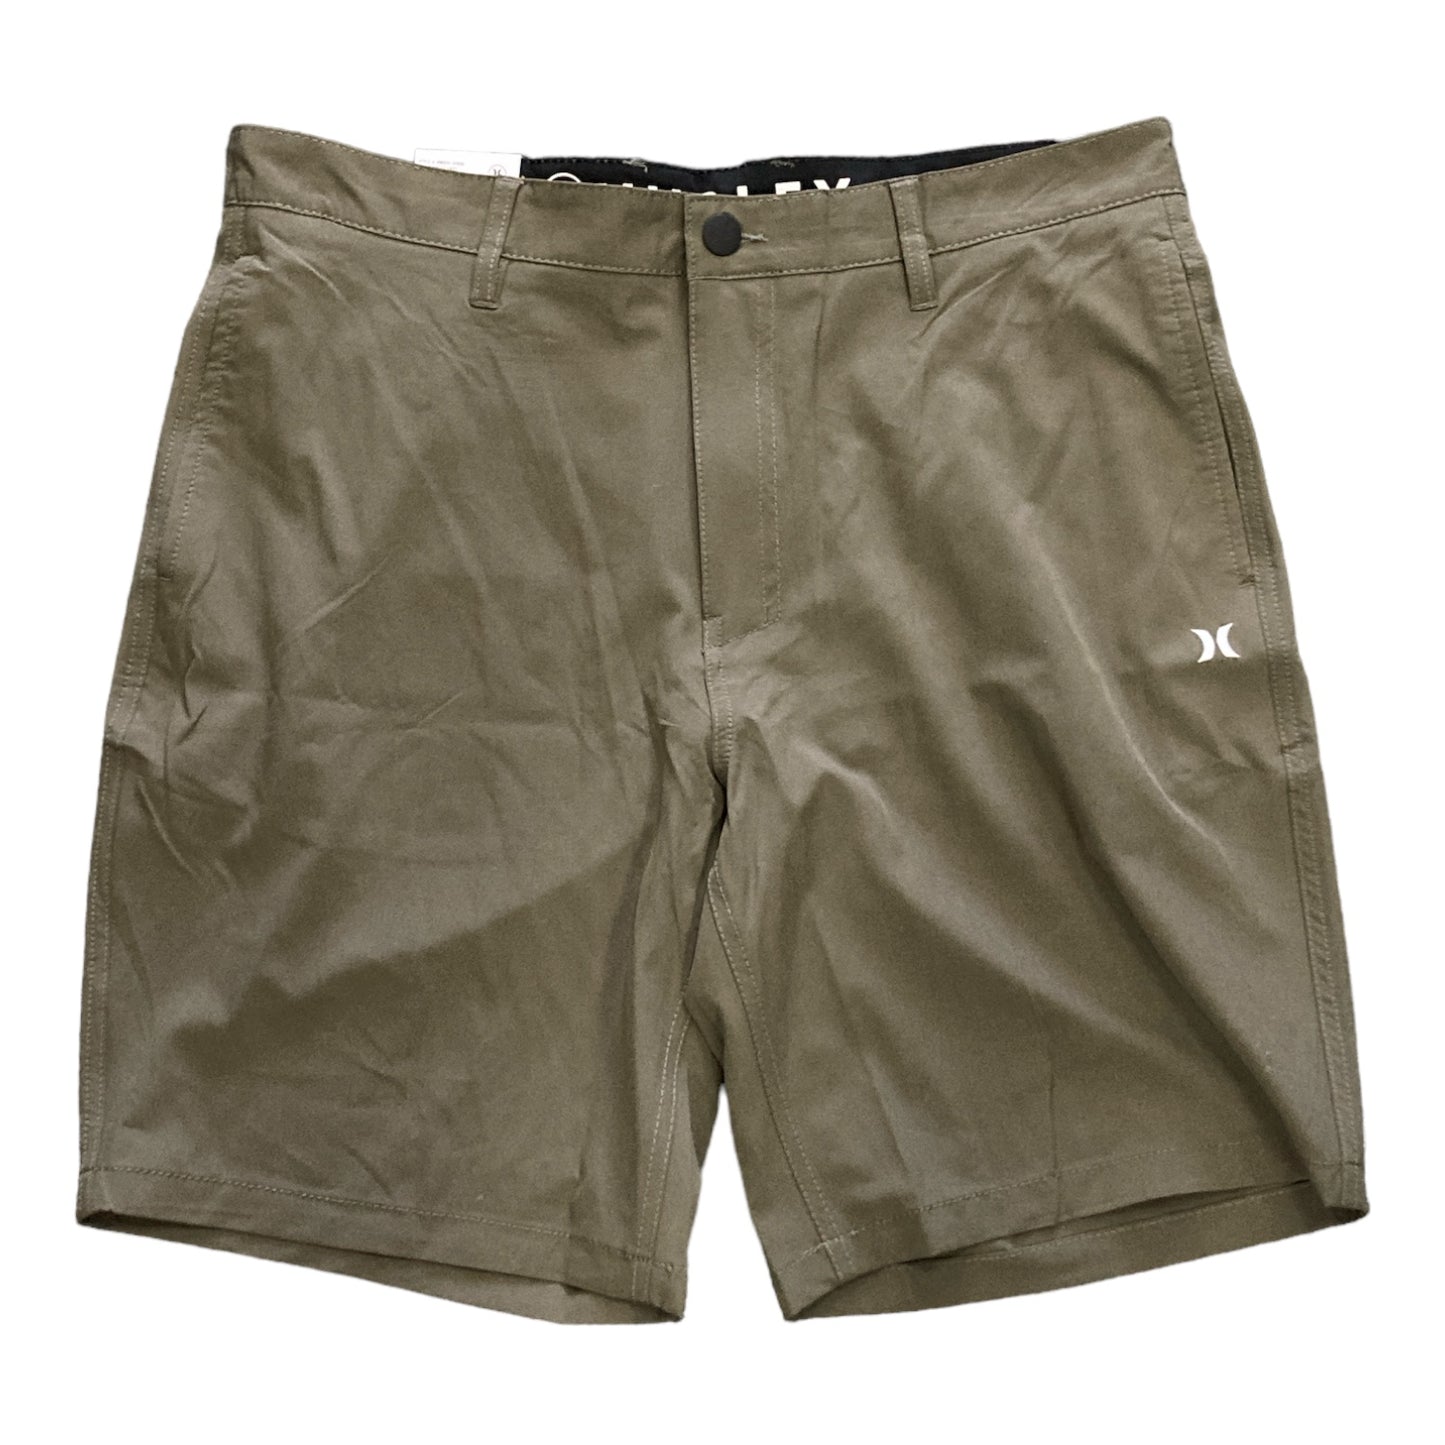 Hurley All Day Hybrid Quick Dry 4-Way Stretch Reflective Short